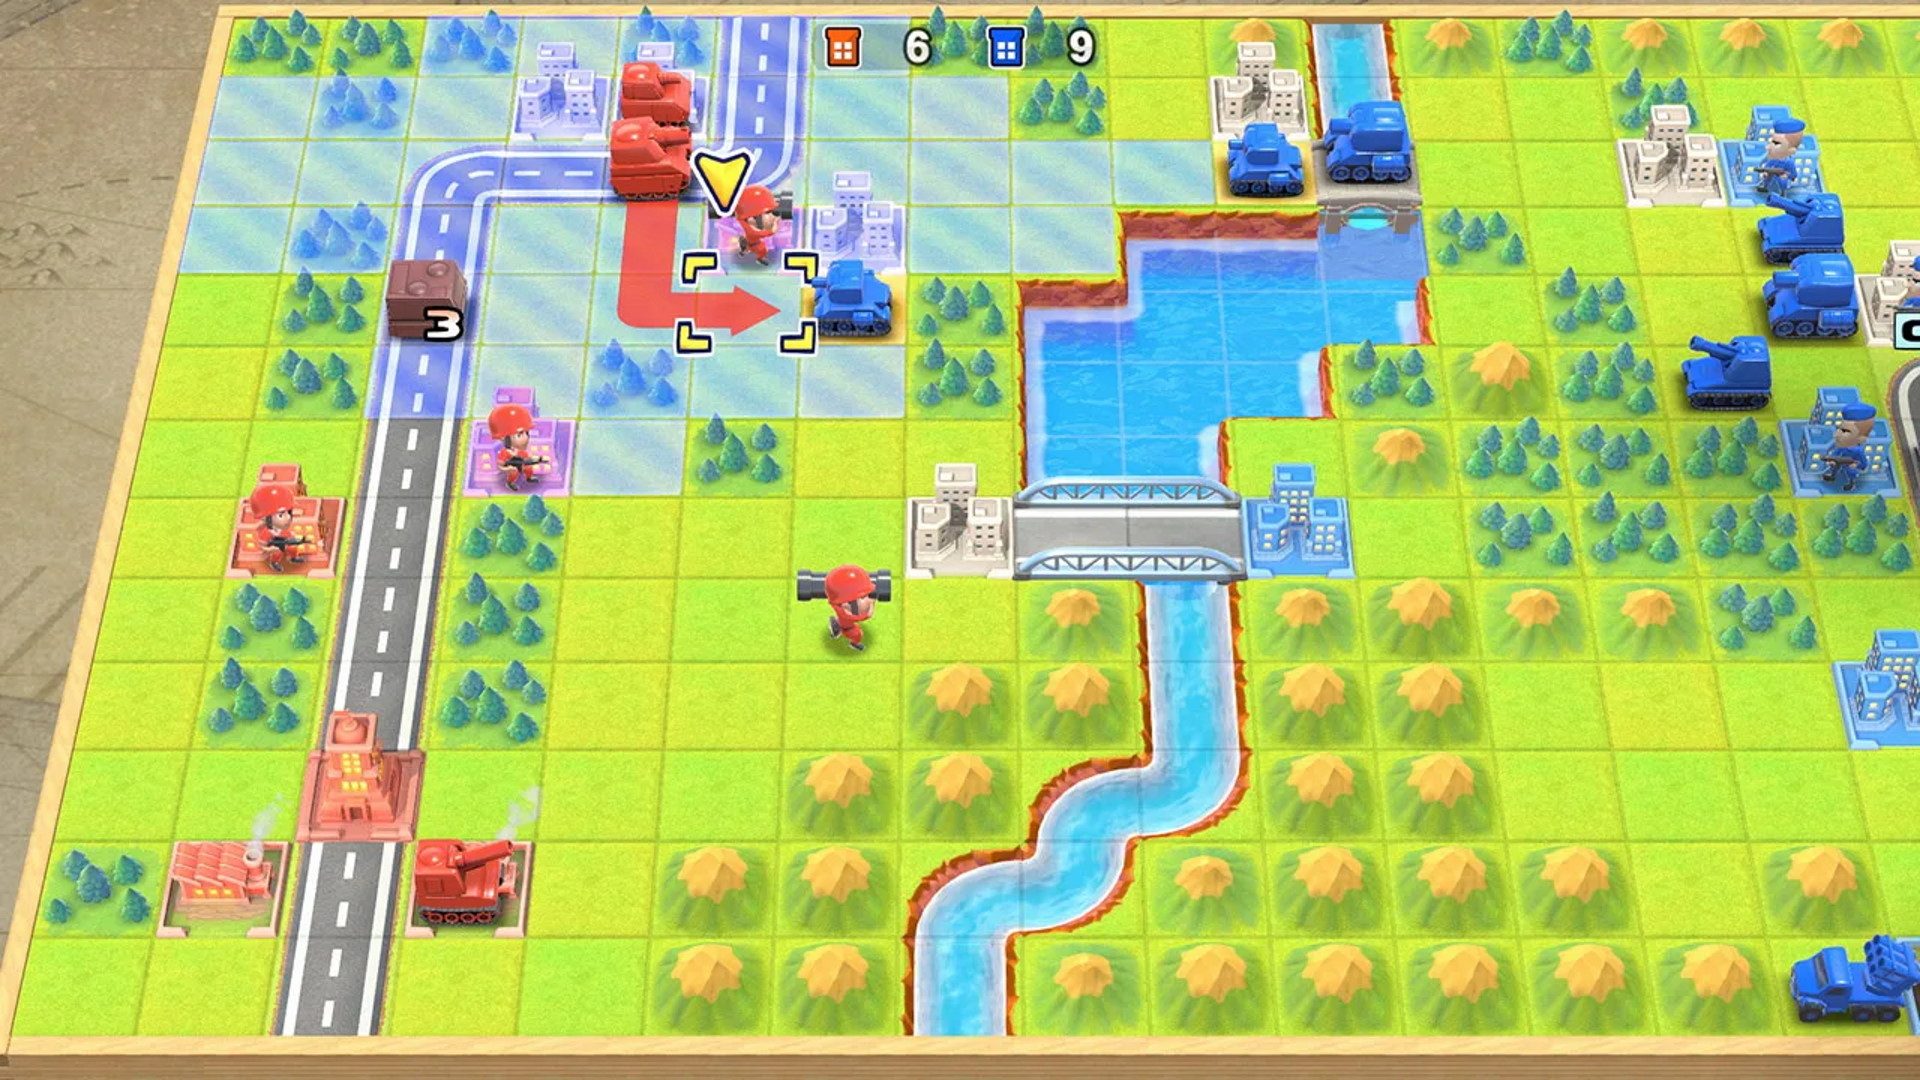 Nintendo gives an Advance Wars 1 2 update after today's Direct